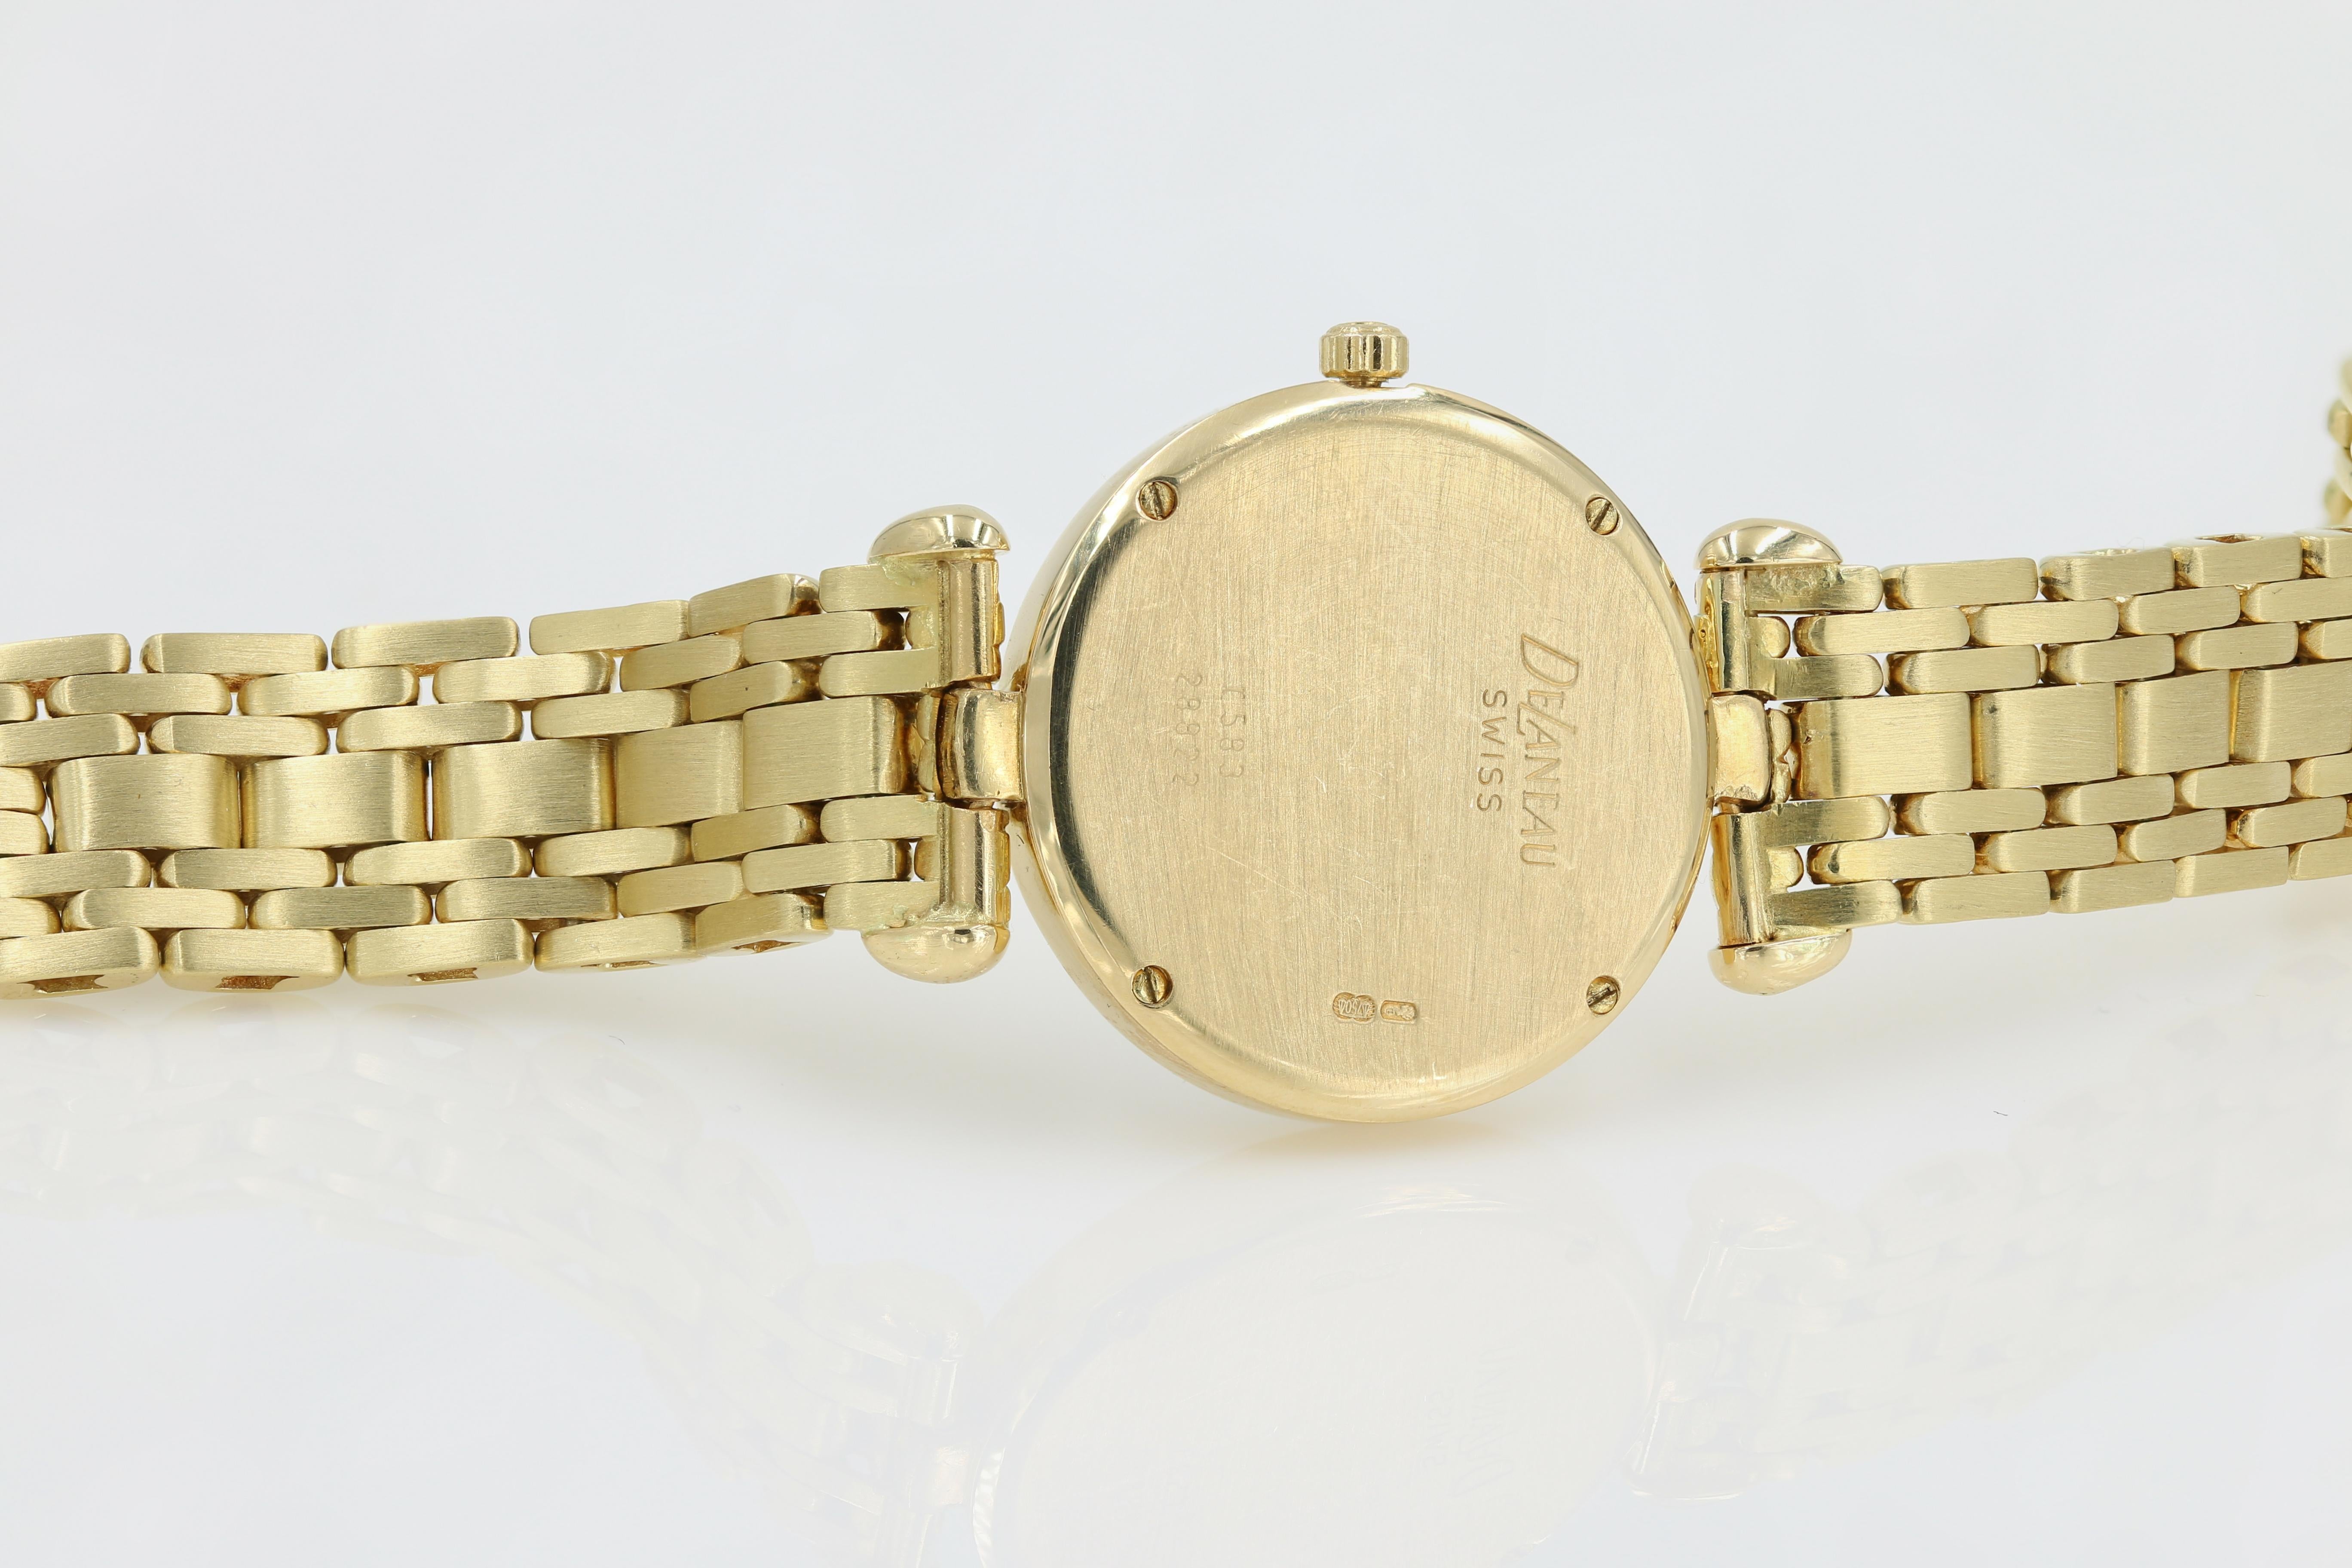 Round Cut DeLaneau 18 Karat Gold & Diamond Bracelet Watch with Faceted Crystal & MOP Dial